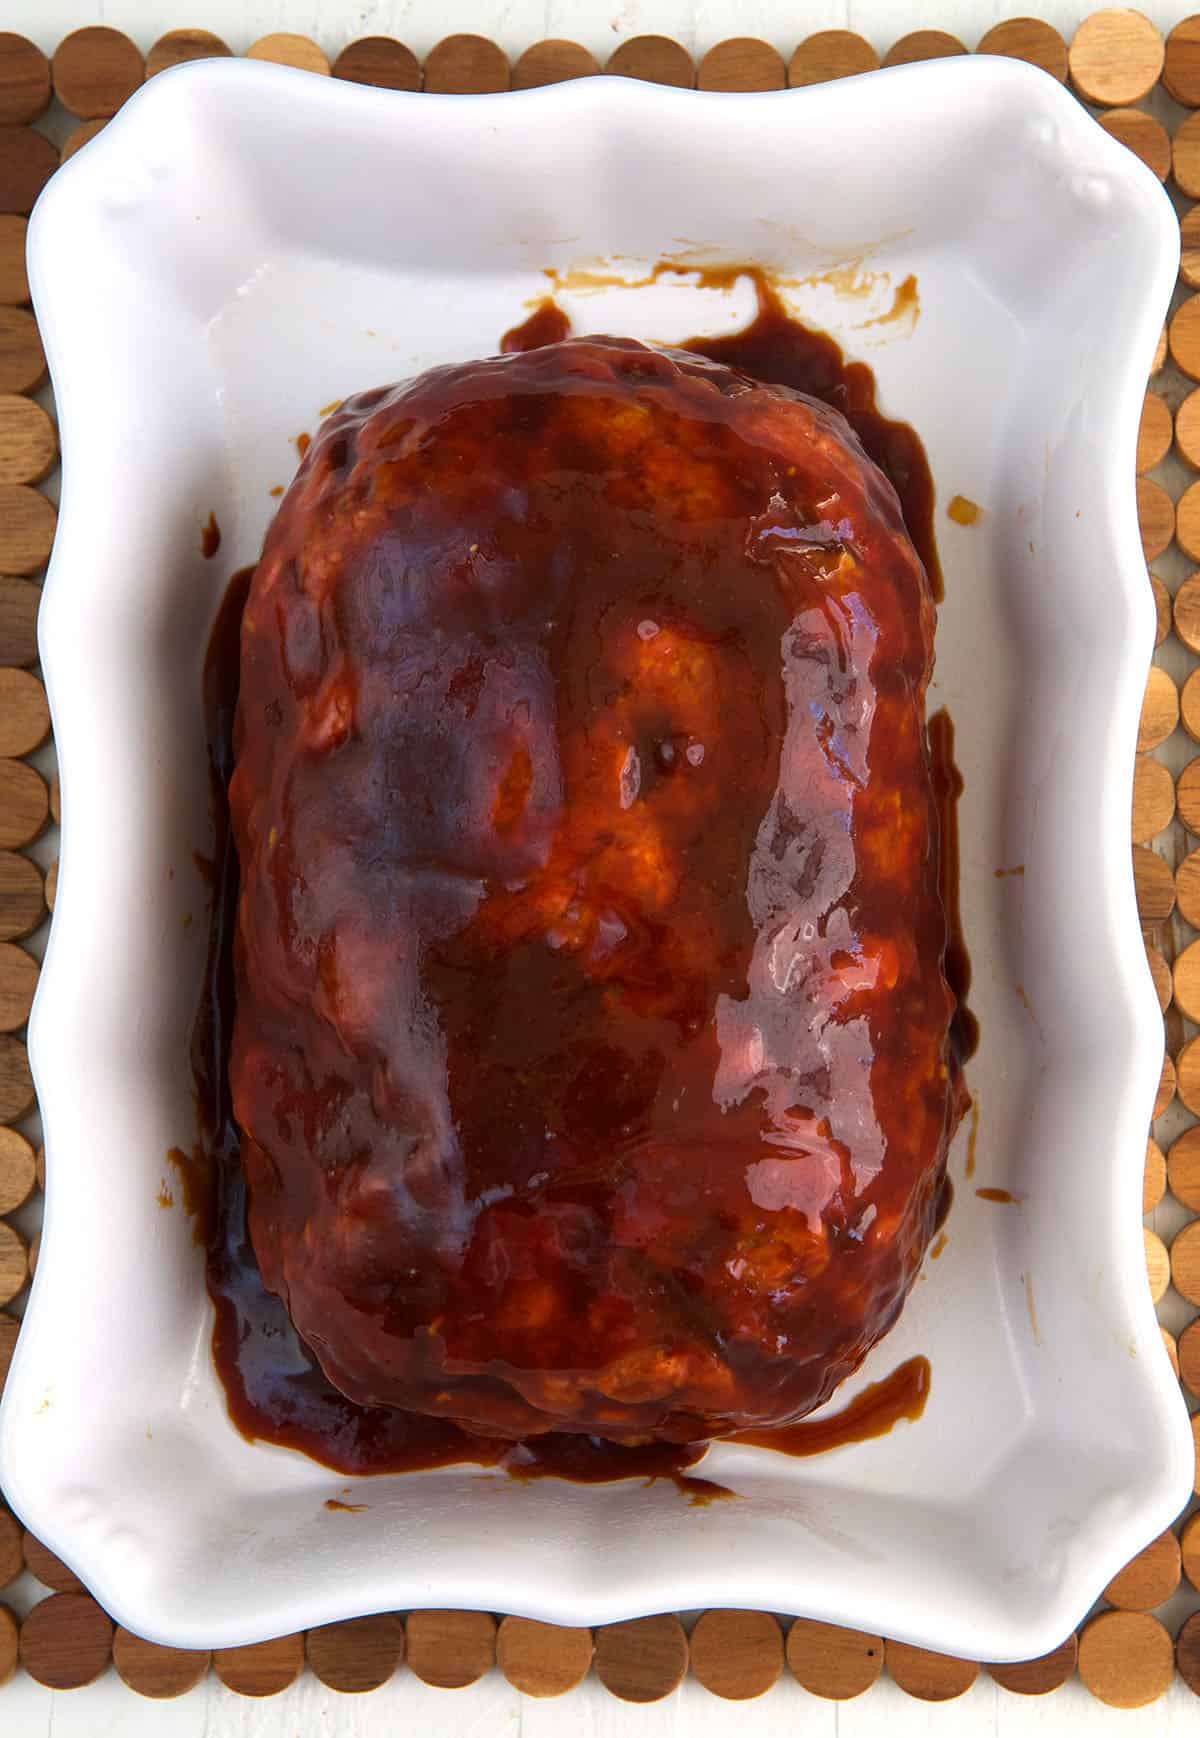 A prepared but unbaked meatloaf is placed on a baking dish.